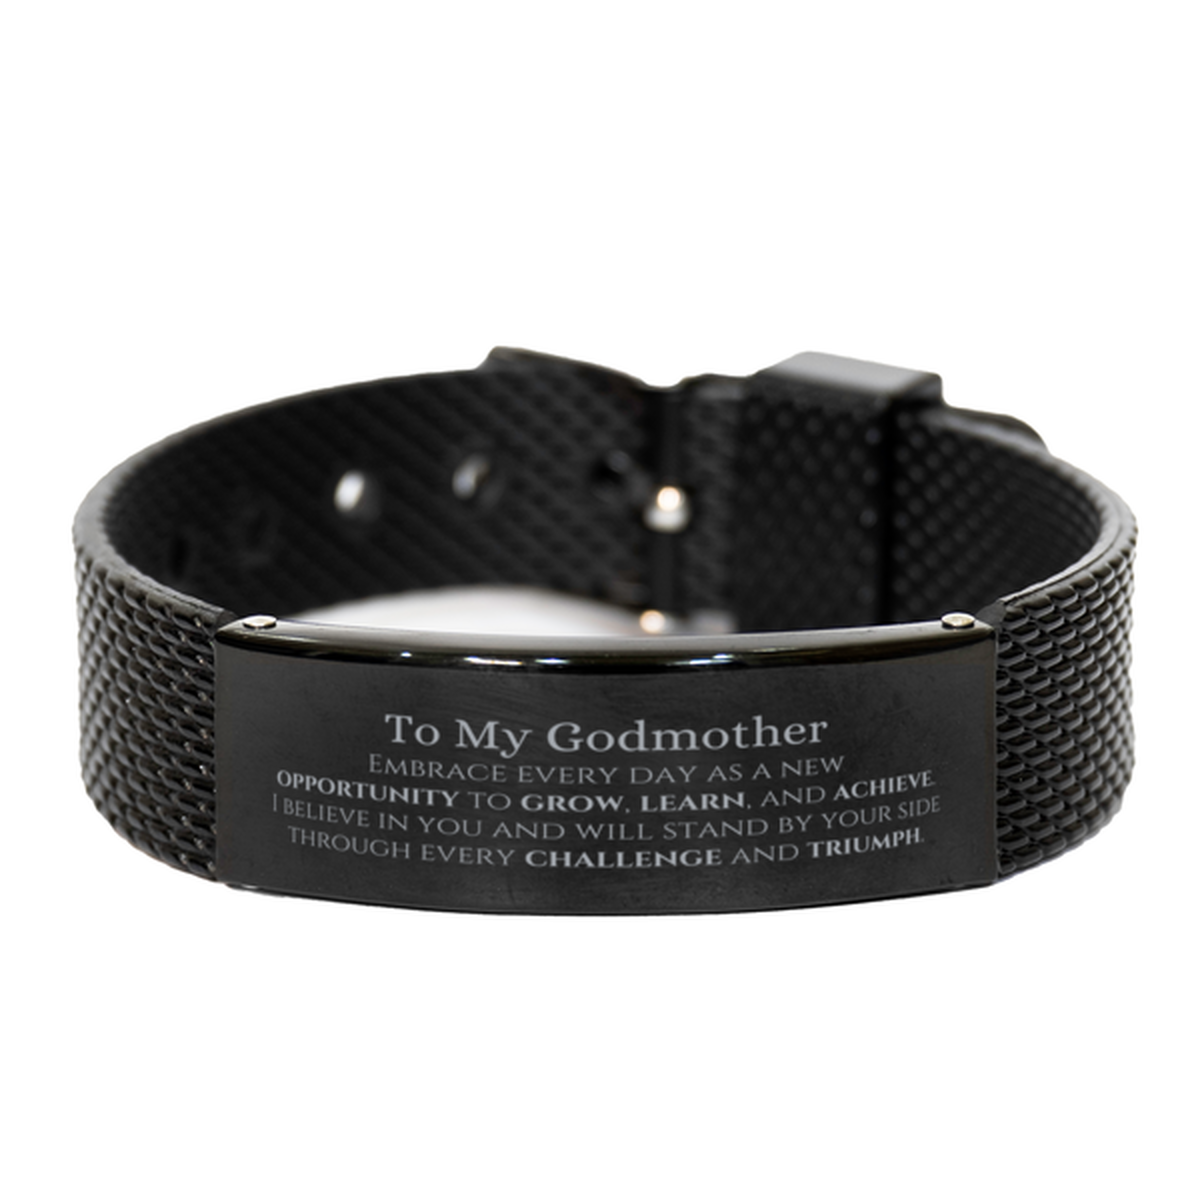 To My Godmother Gifts, I believe in you and will stand by your side, Inspirational Black Shark Mesh Bracelet For Godmother, Birthday Christmas Motivational Godmother Gifts